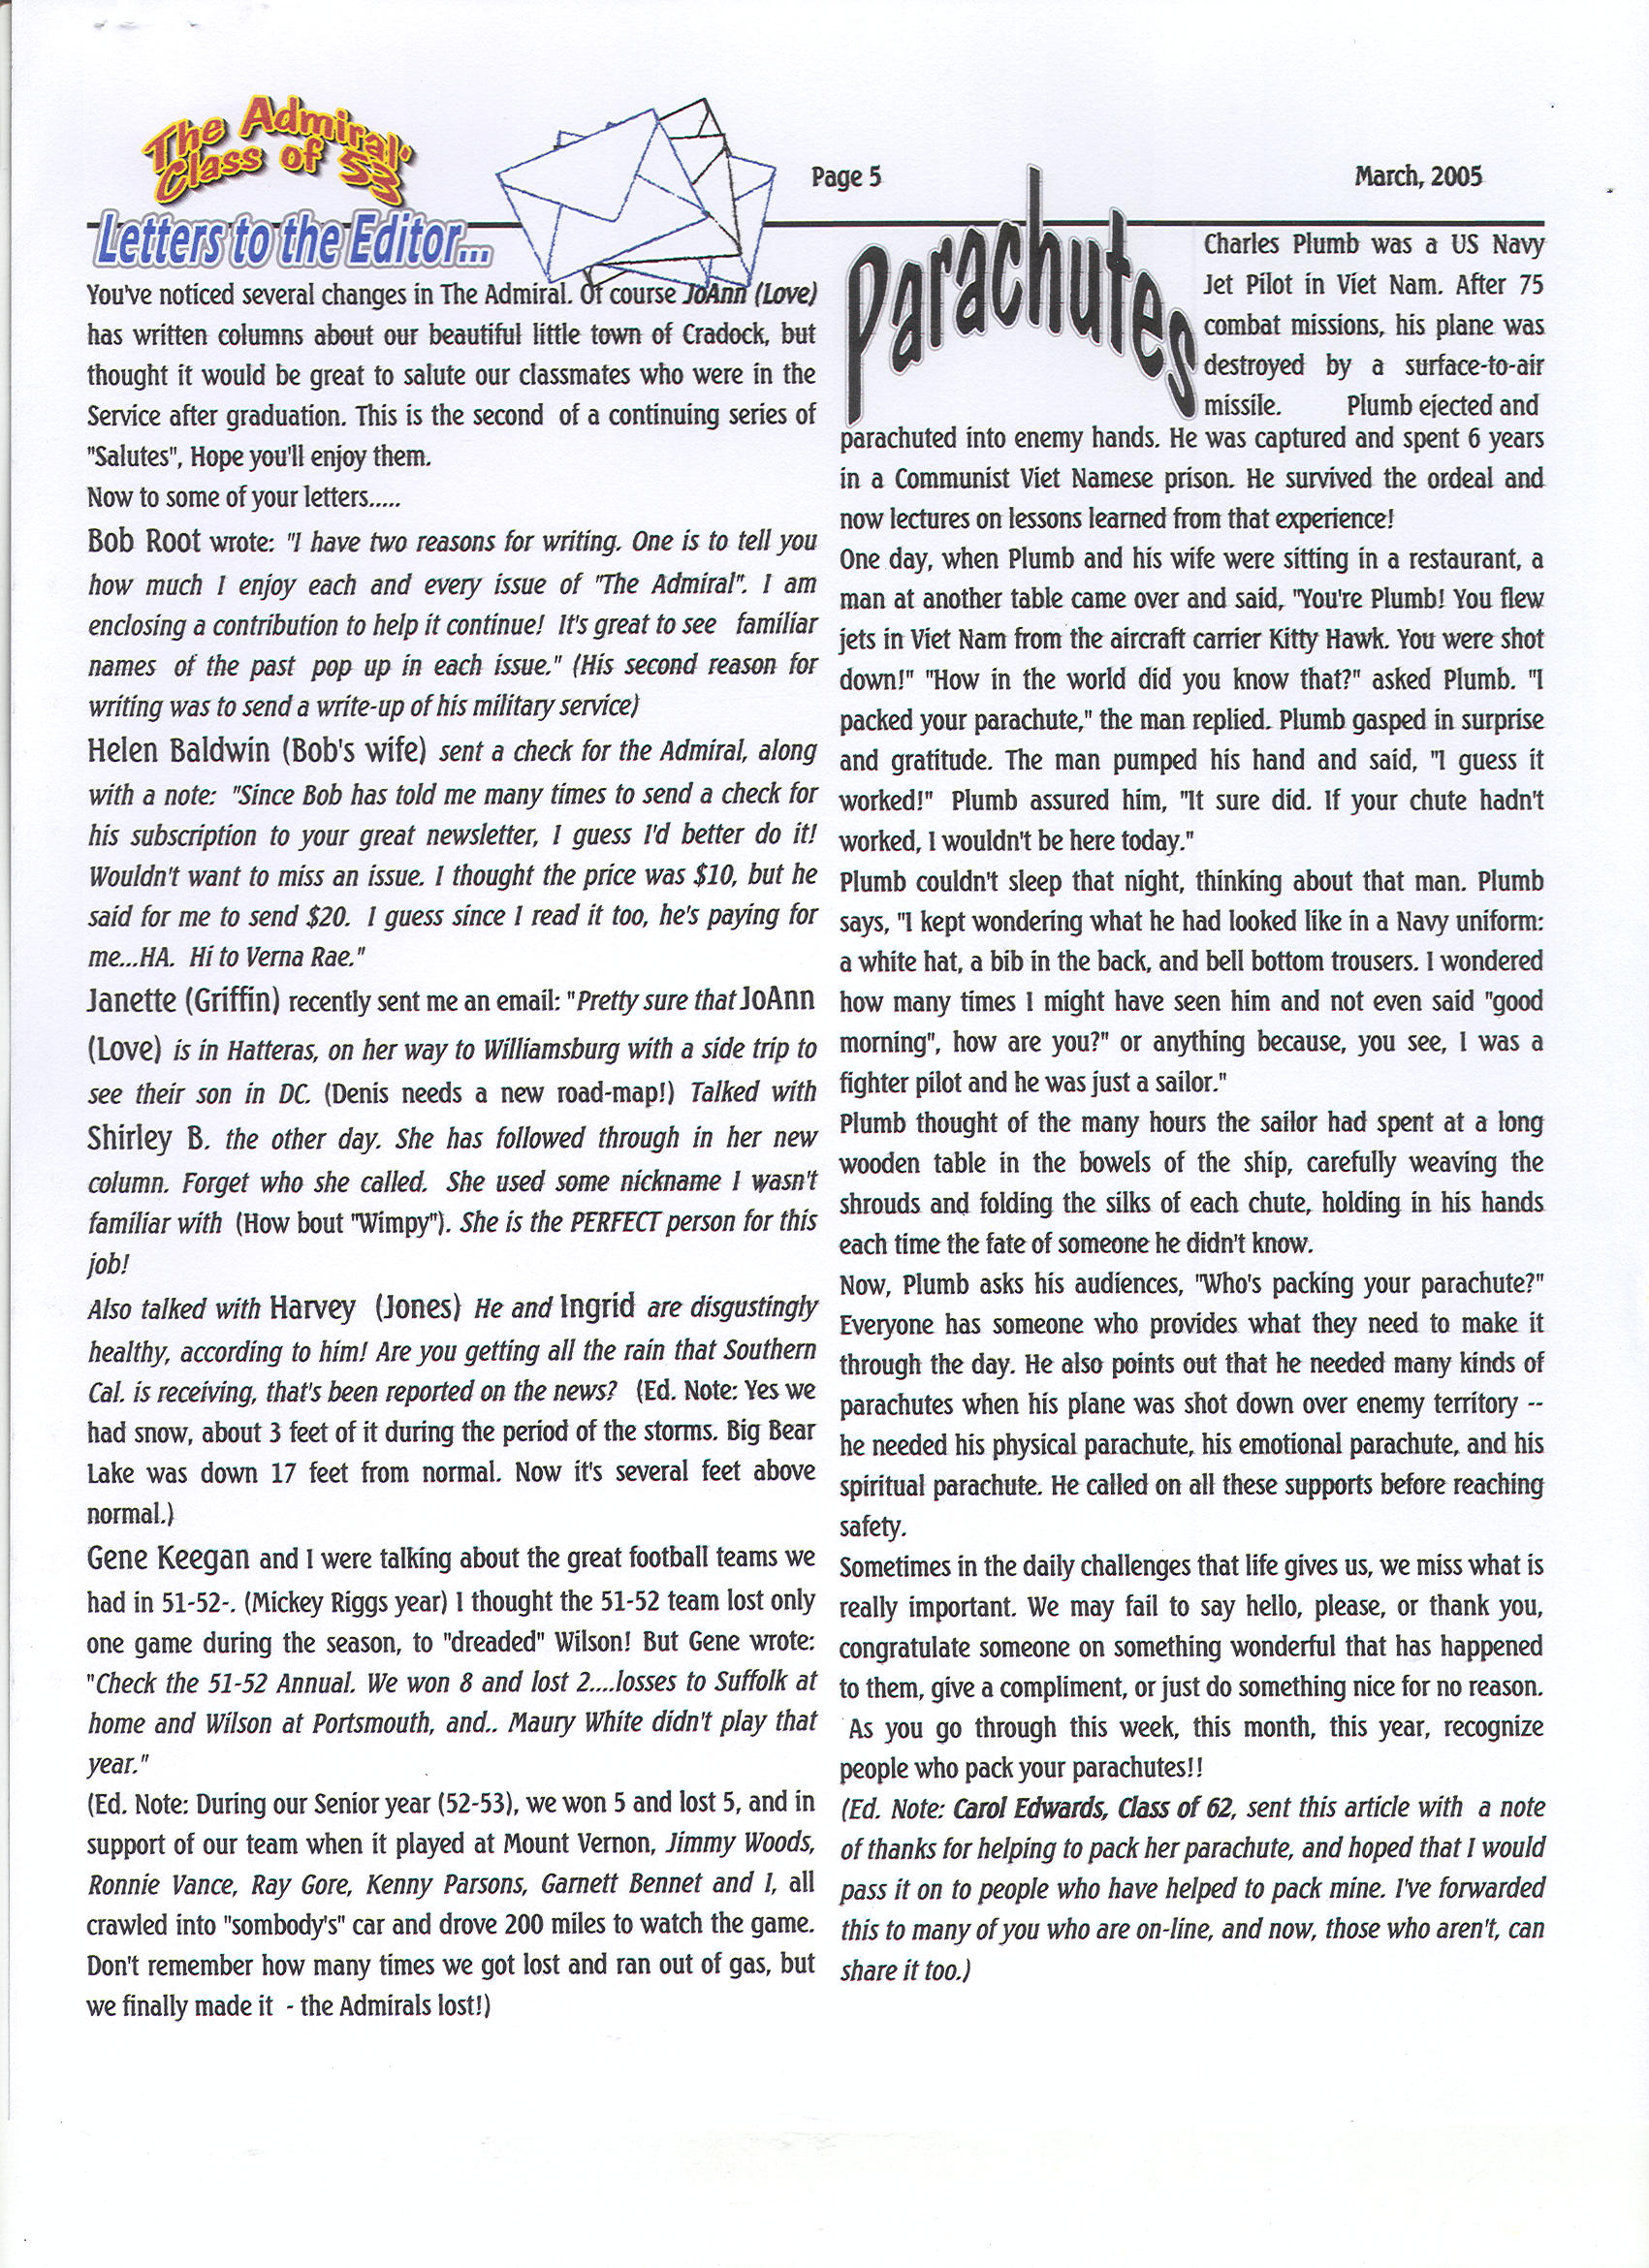 The Admiral - March 2005 - pg. 5